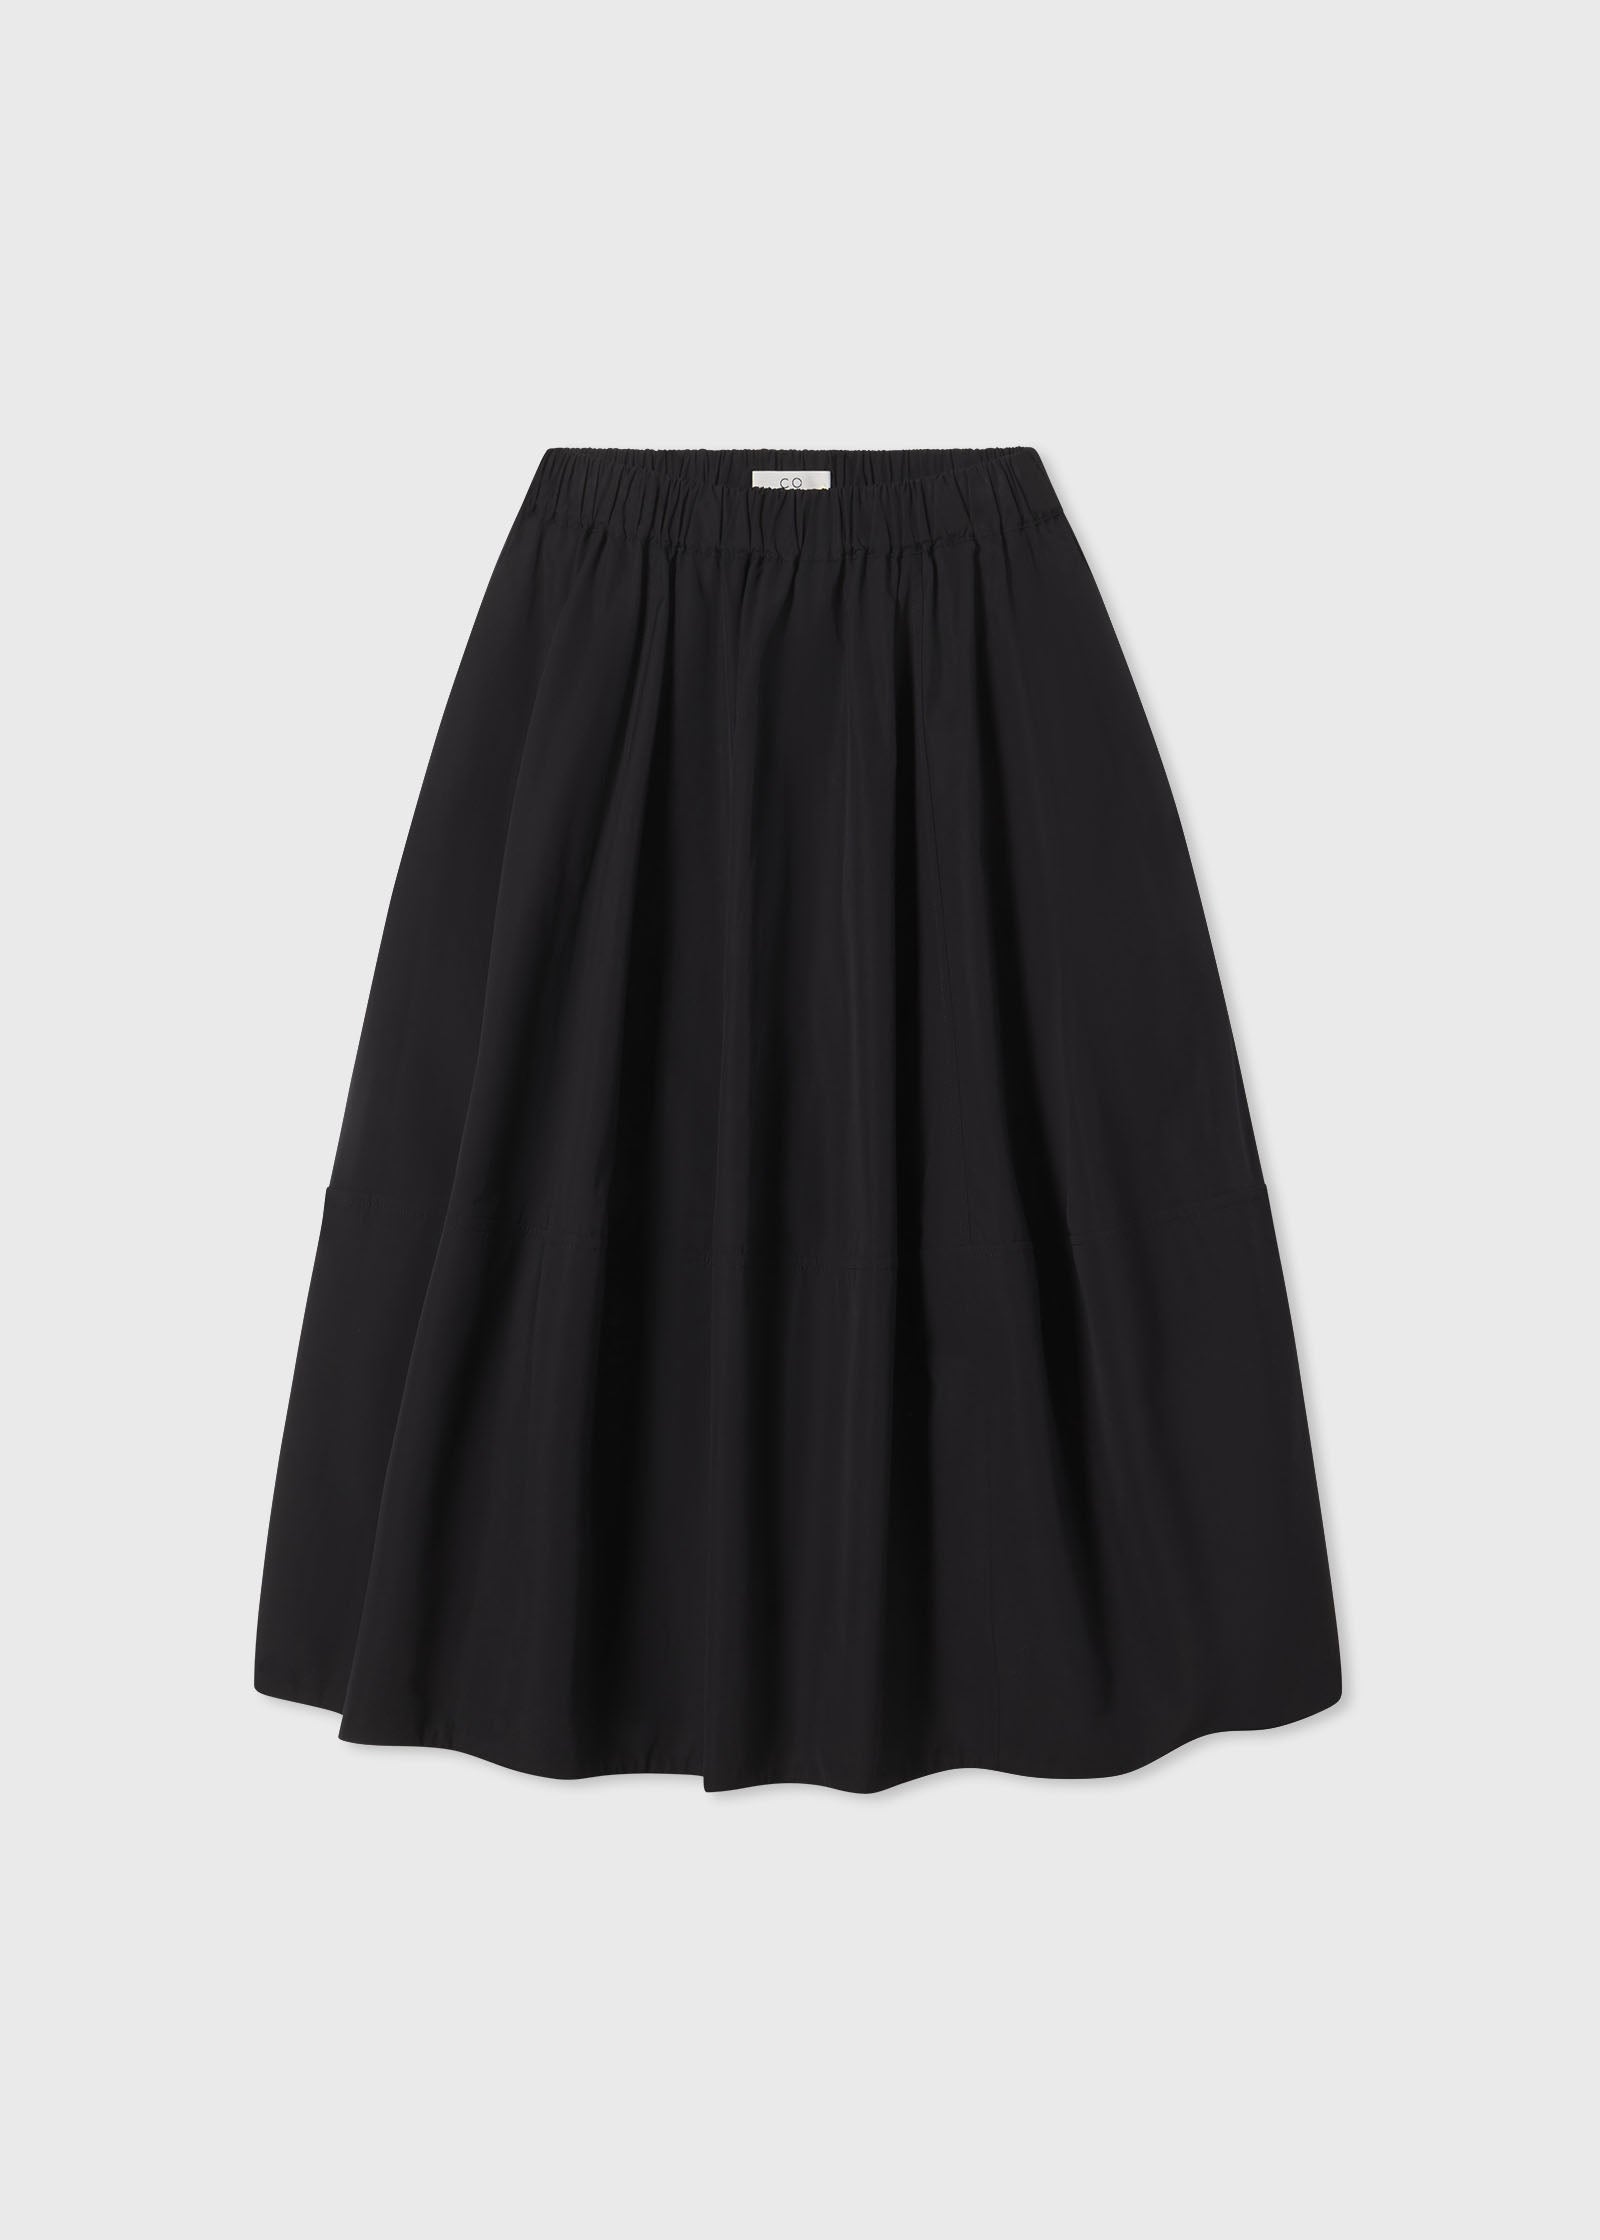 Full Skirt in Cotton Poplin - Black - CO Collections